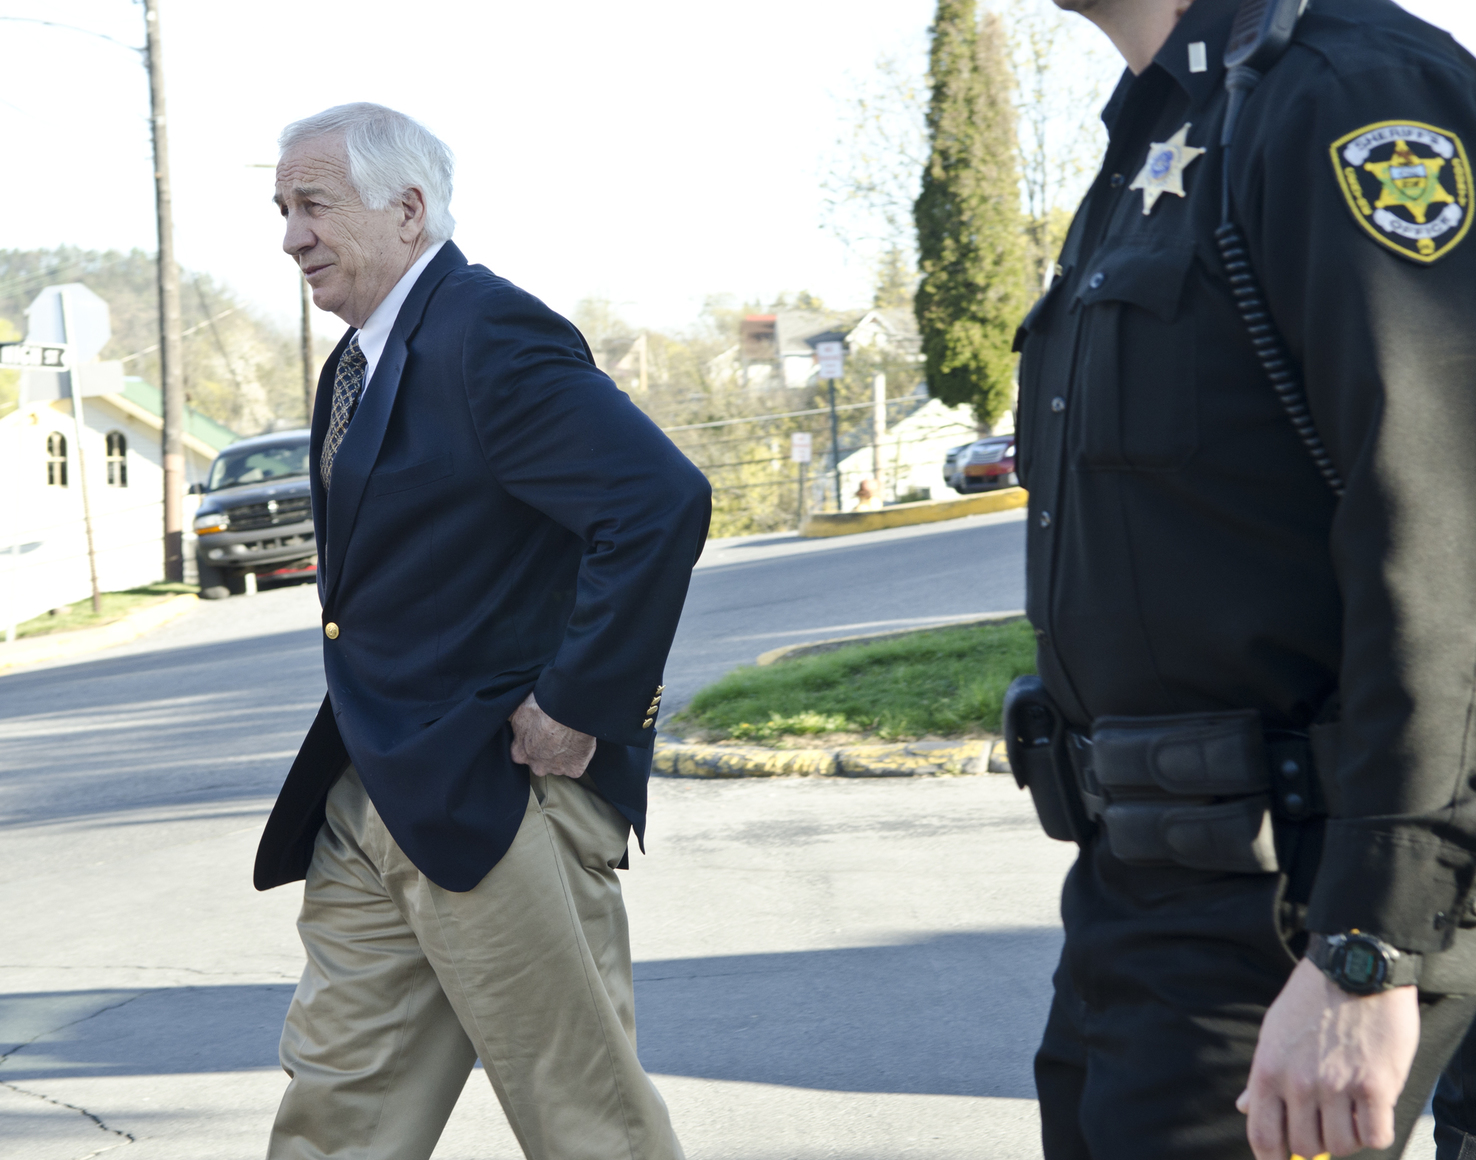 Sandusky Accusers File Motions to Remain Anonymous - Onward State